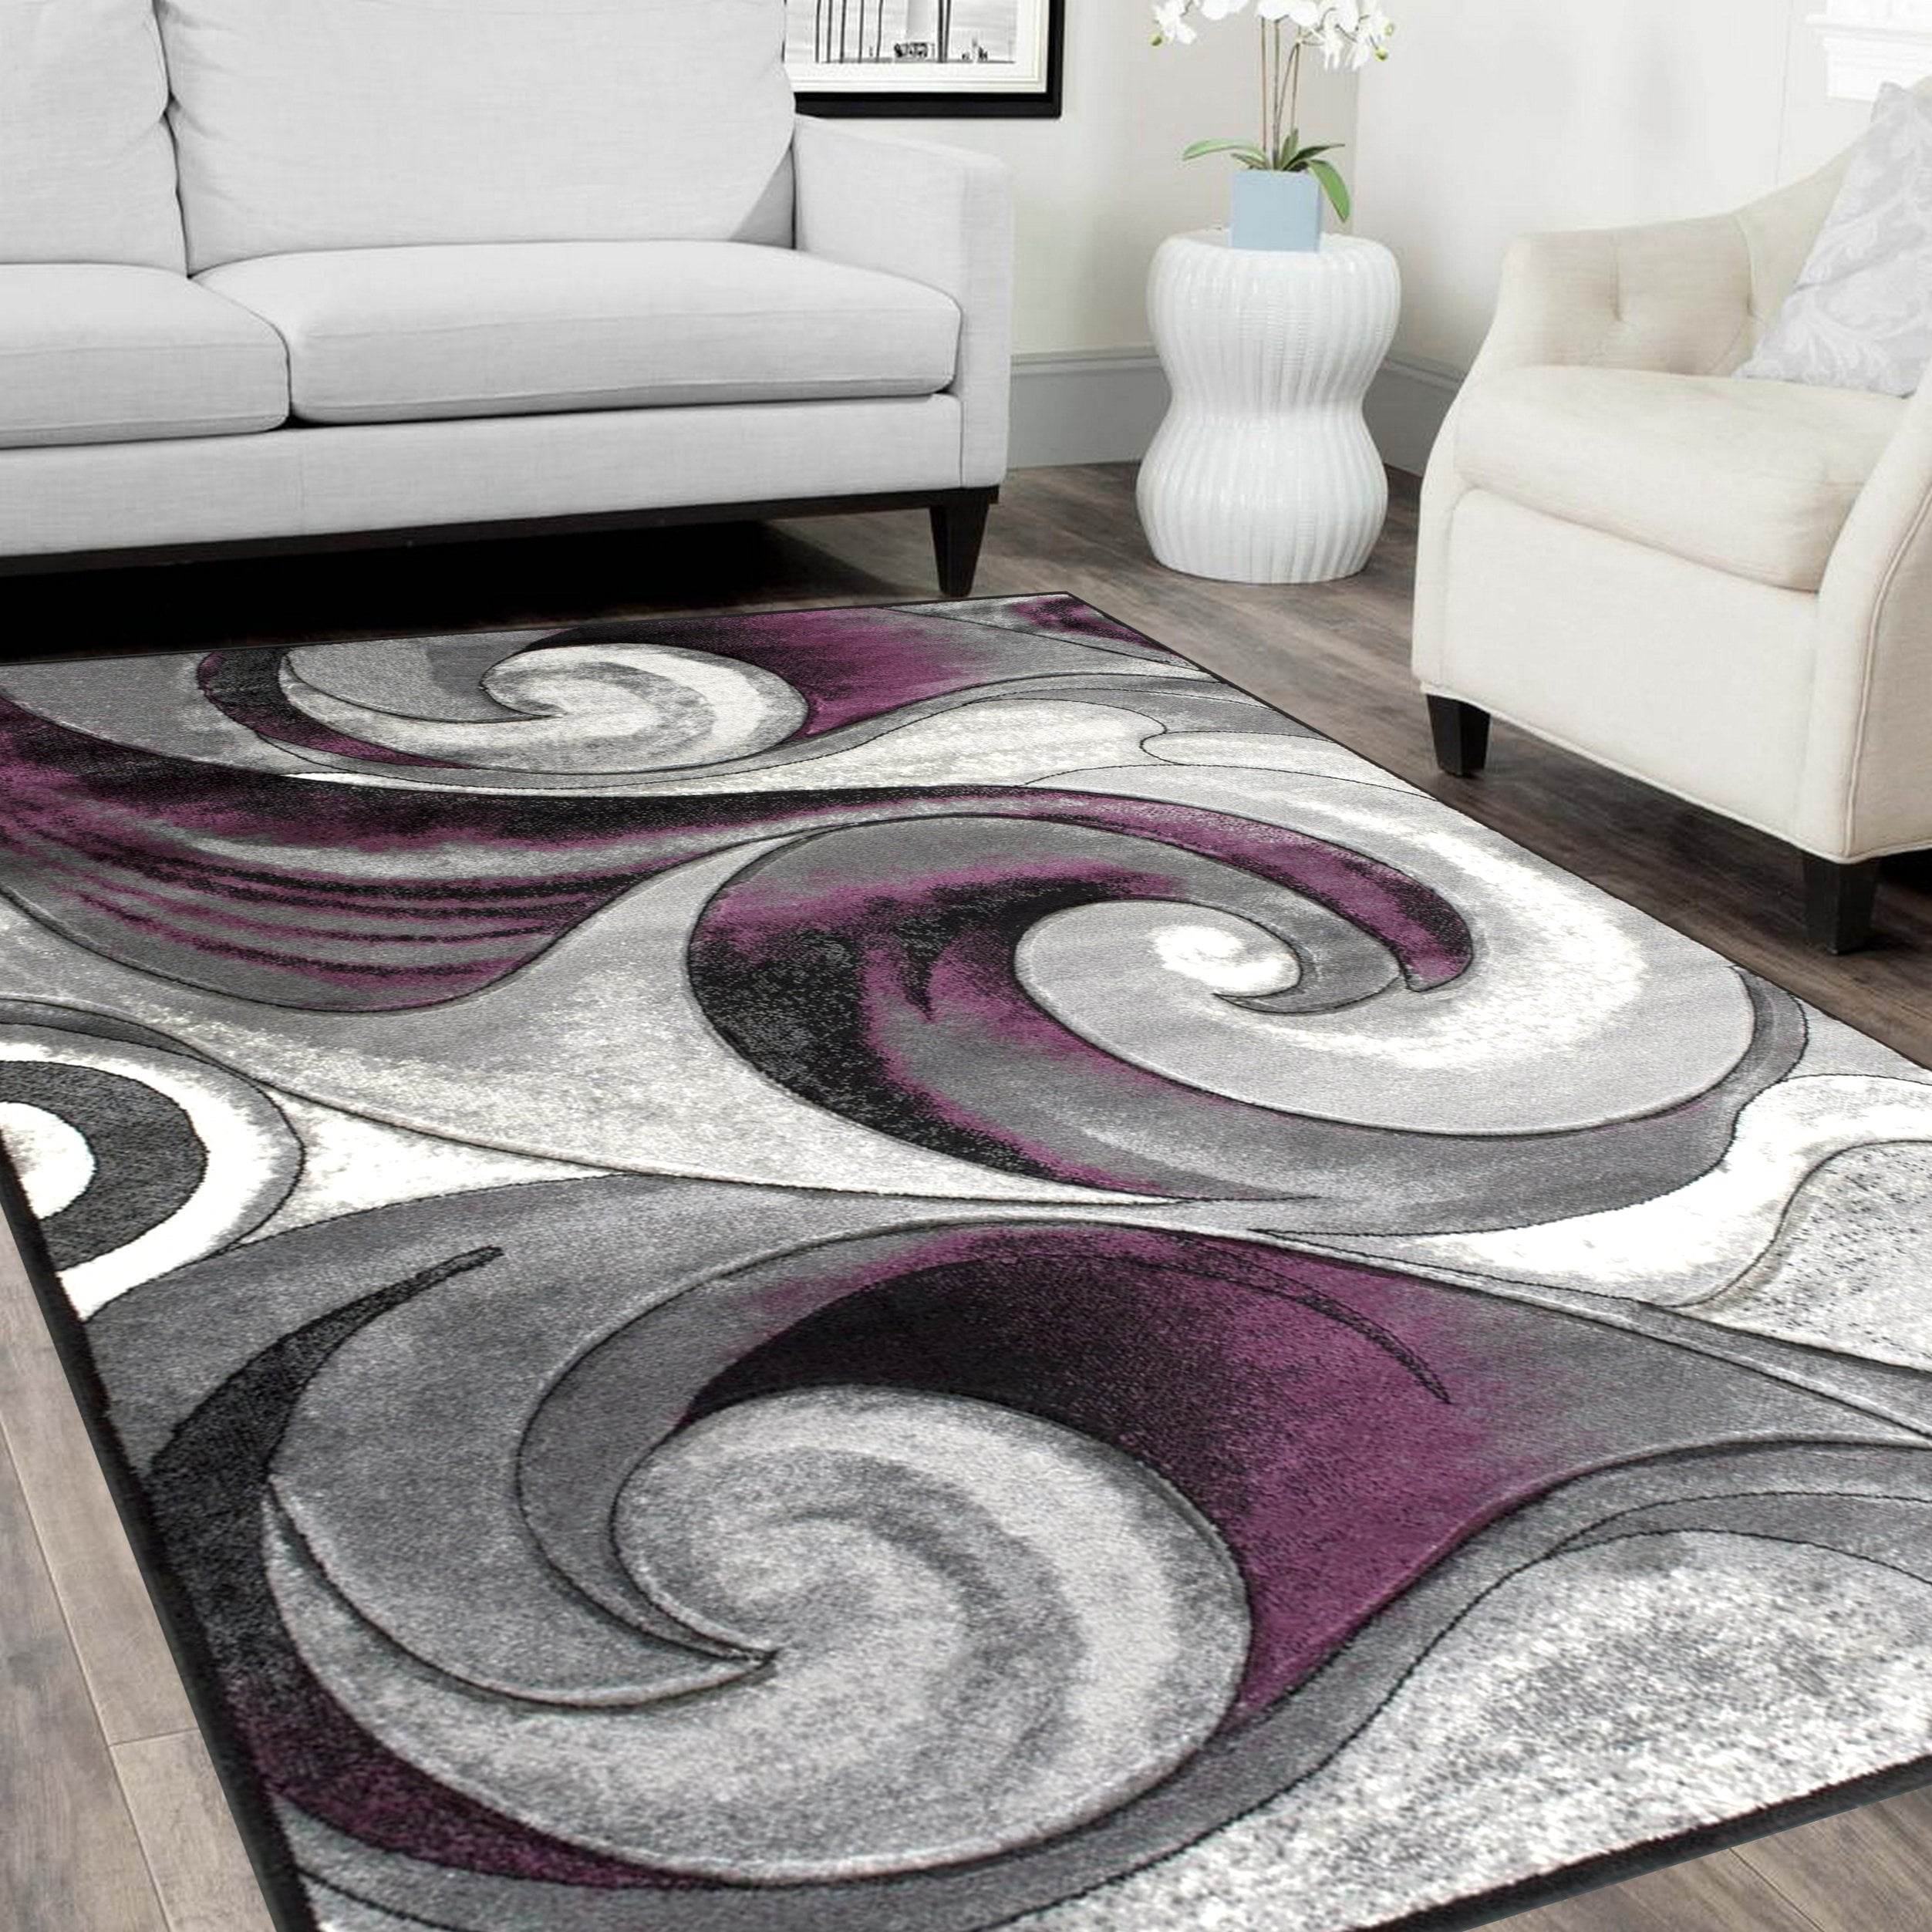 8' x 10' Feet Brand New Turquoise Silver Grey Swirls Hand-Carved Soft Living Room Modern Contemporary Area Rug